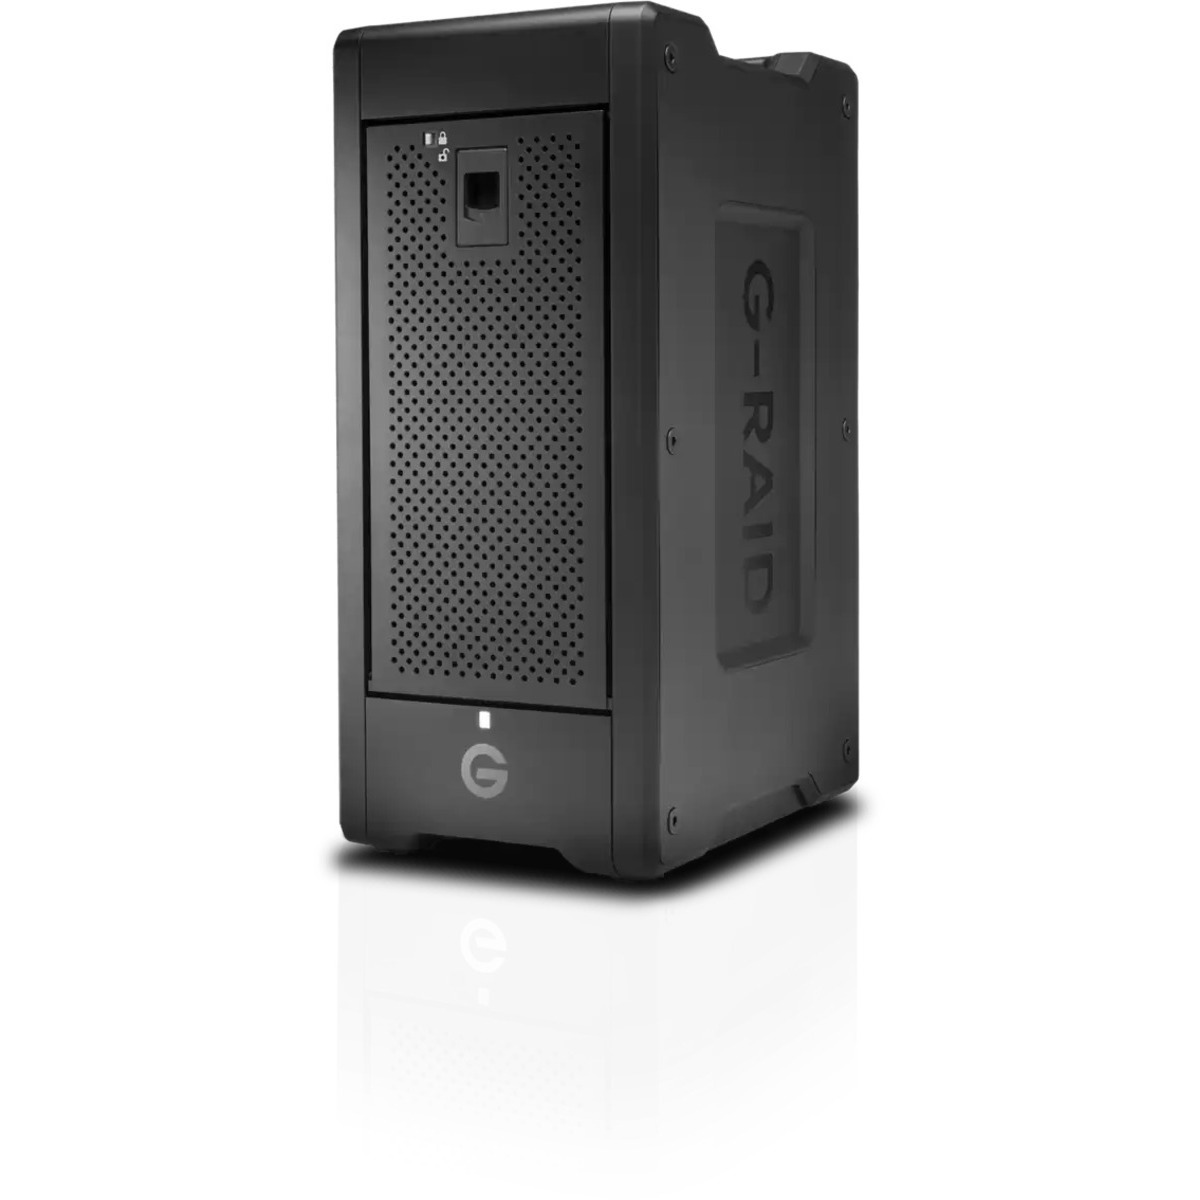 buy G-Technology G-RAID Shuttle 8 Thunderbolt 3 USB 3.2 Gen 2 48tb Desktop DAS - Direct Attached Storage Device 8x6000gb Western Digital Red WD60EFAX 3.5 5400rpm SATA 6Gb/s HDD NAS Class Drives Installed - Burn-In Tested - ON SALE - nas headquarters buy network attached storage server device das new raid-5 free shipping simply usa G-RAID Shuttle 8 Thunderbolt 3 USB 3.2 Gen 2